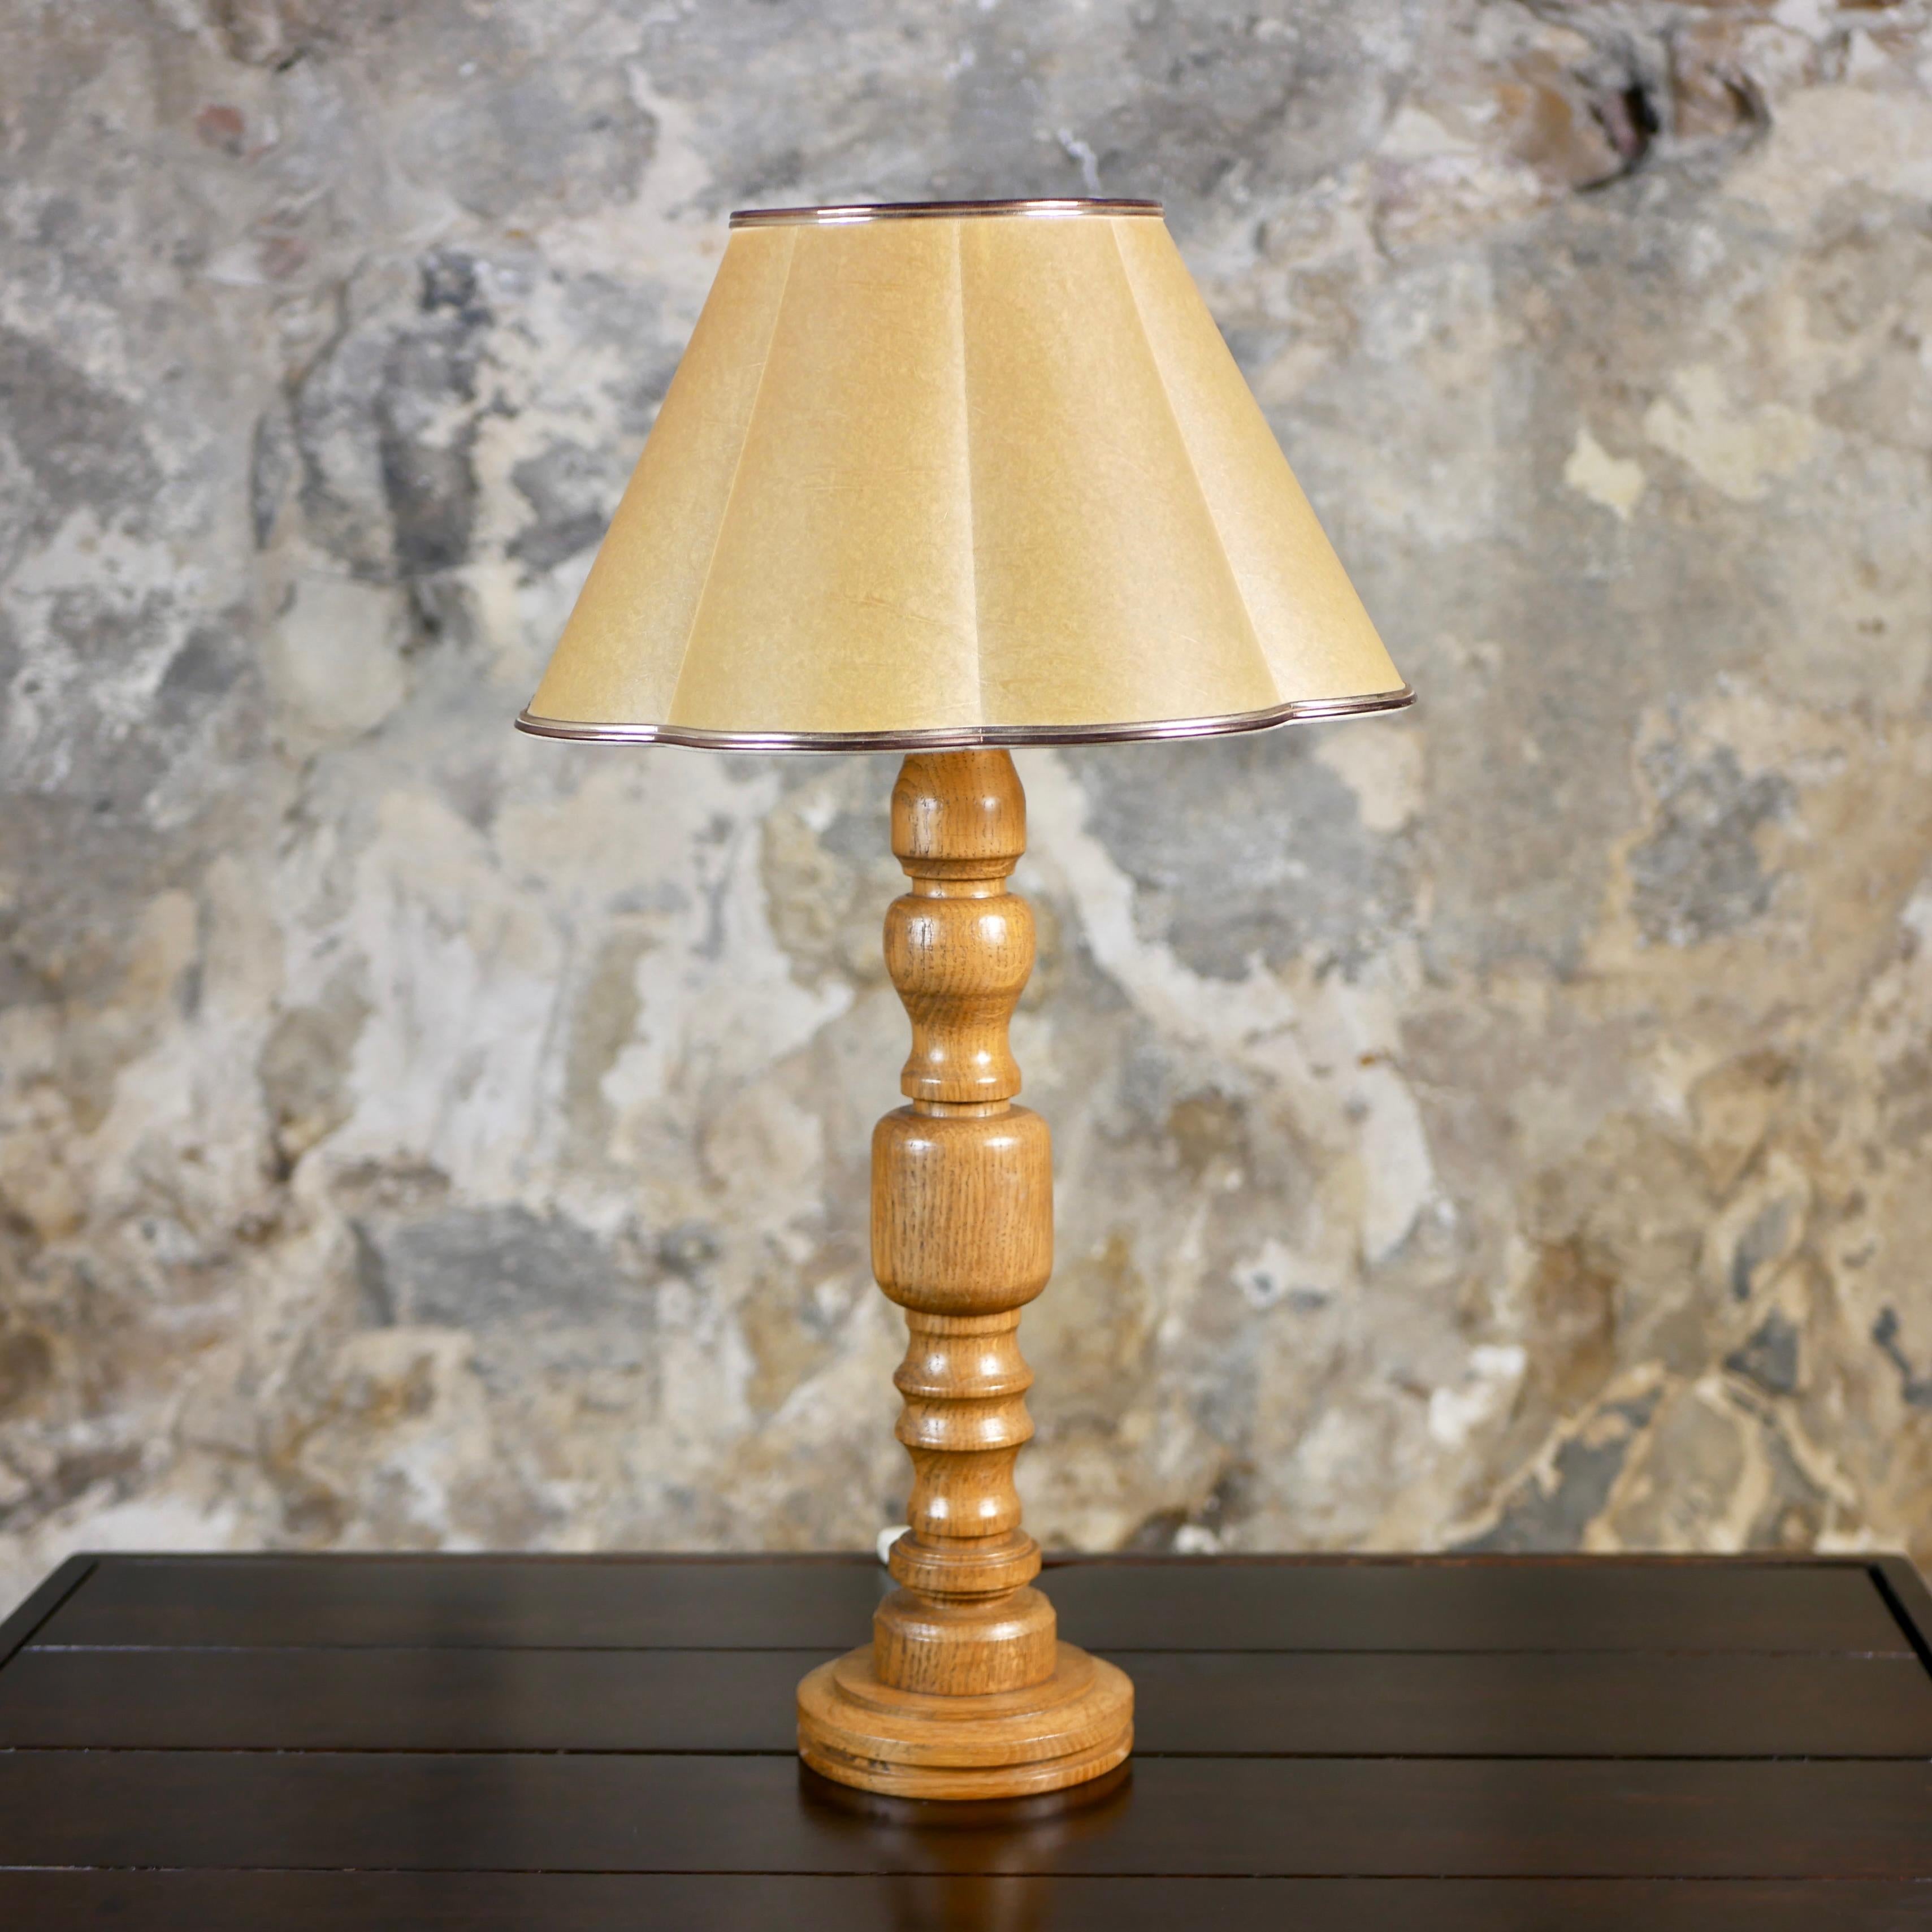 Adorable scandinavian lamp in oak, from the Netherlands, made in the 1970s. Lampshade from France, circa 1960s.
Nice light shade, and in very good condition.
Dimensions : H57, D33cm (max)
